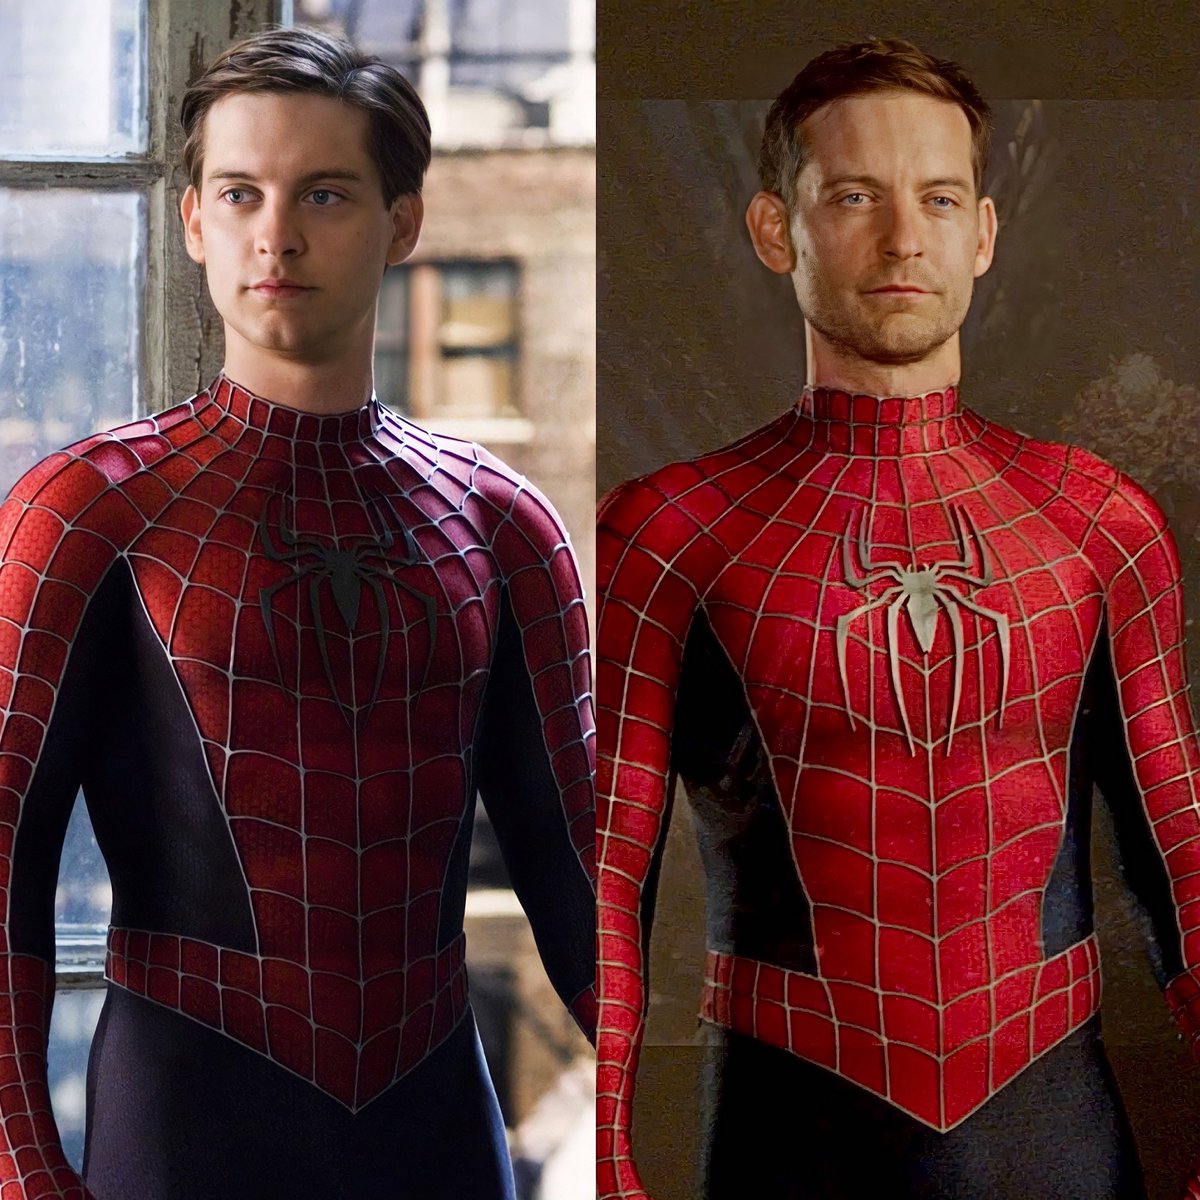 RT @heroichollywood: Tobey has been Spider-Man for 20 years. https://t.co/ak07oGuk2w